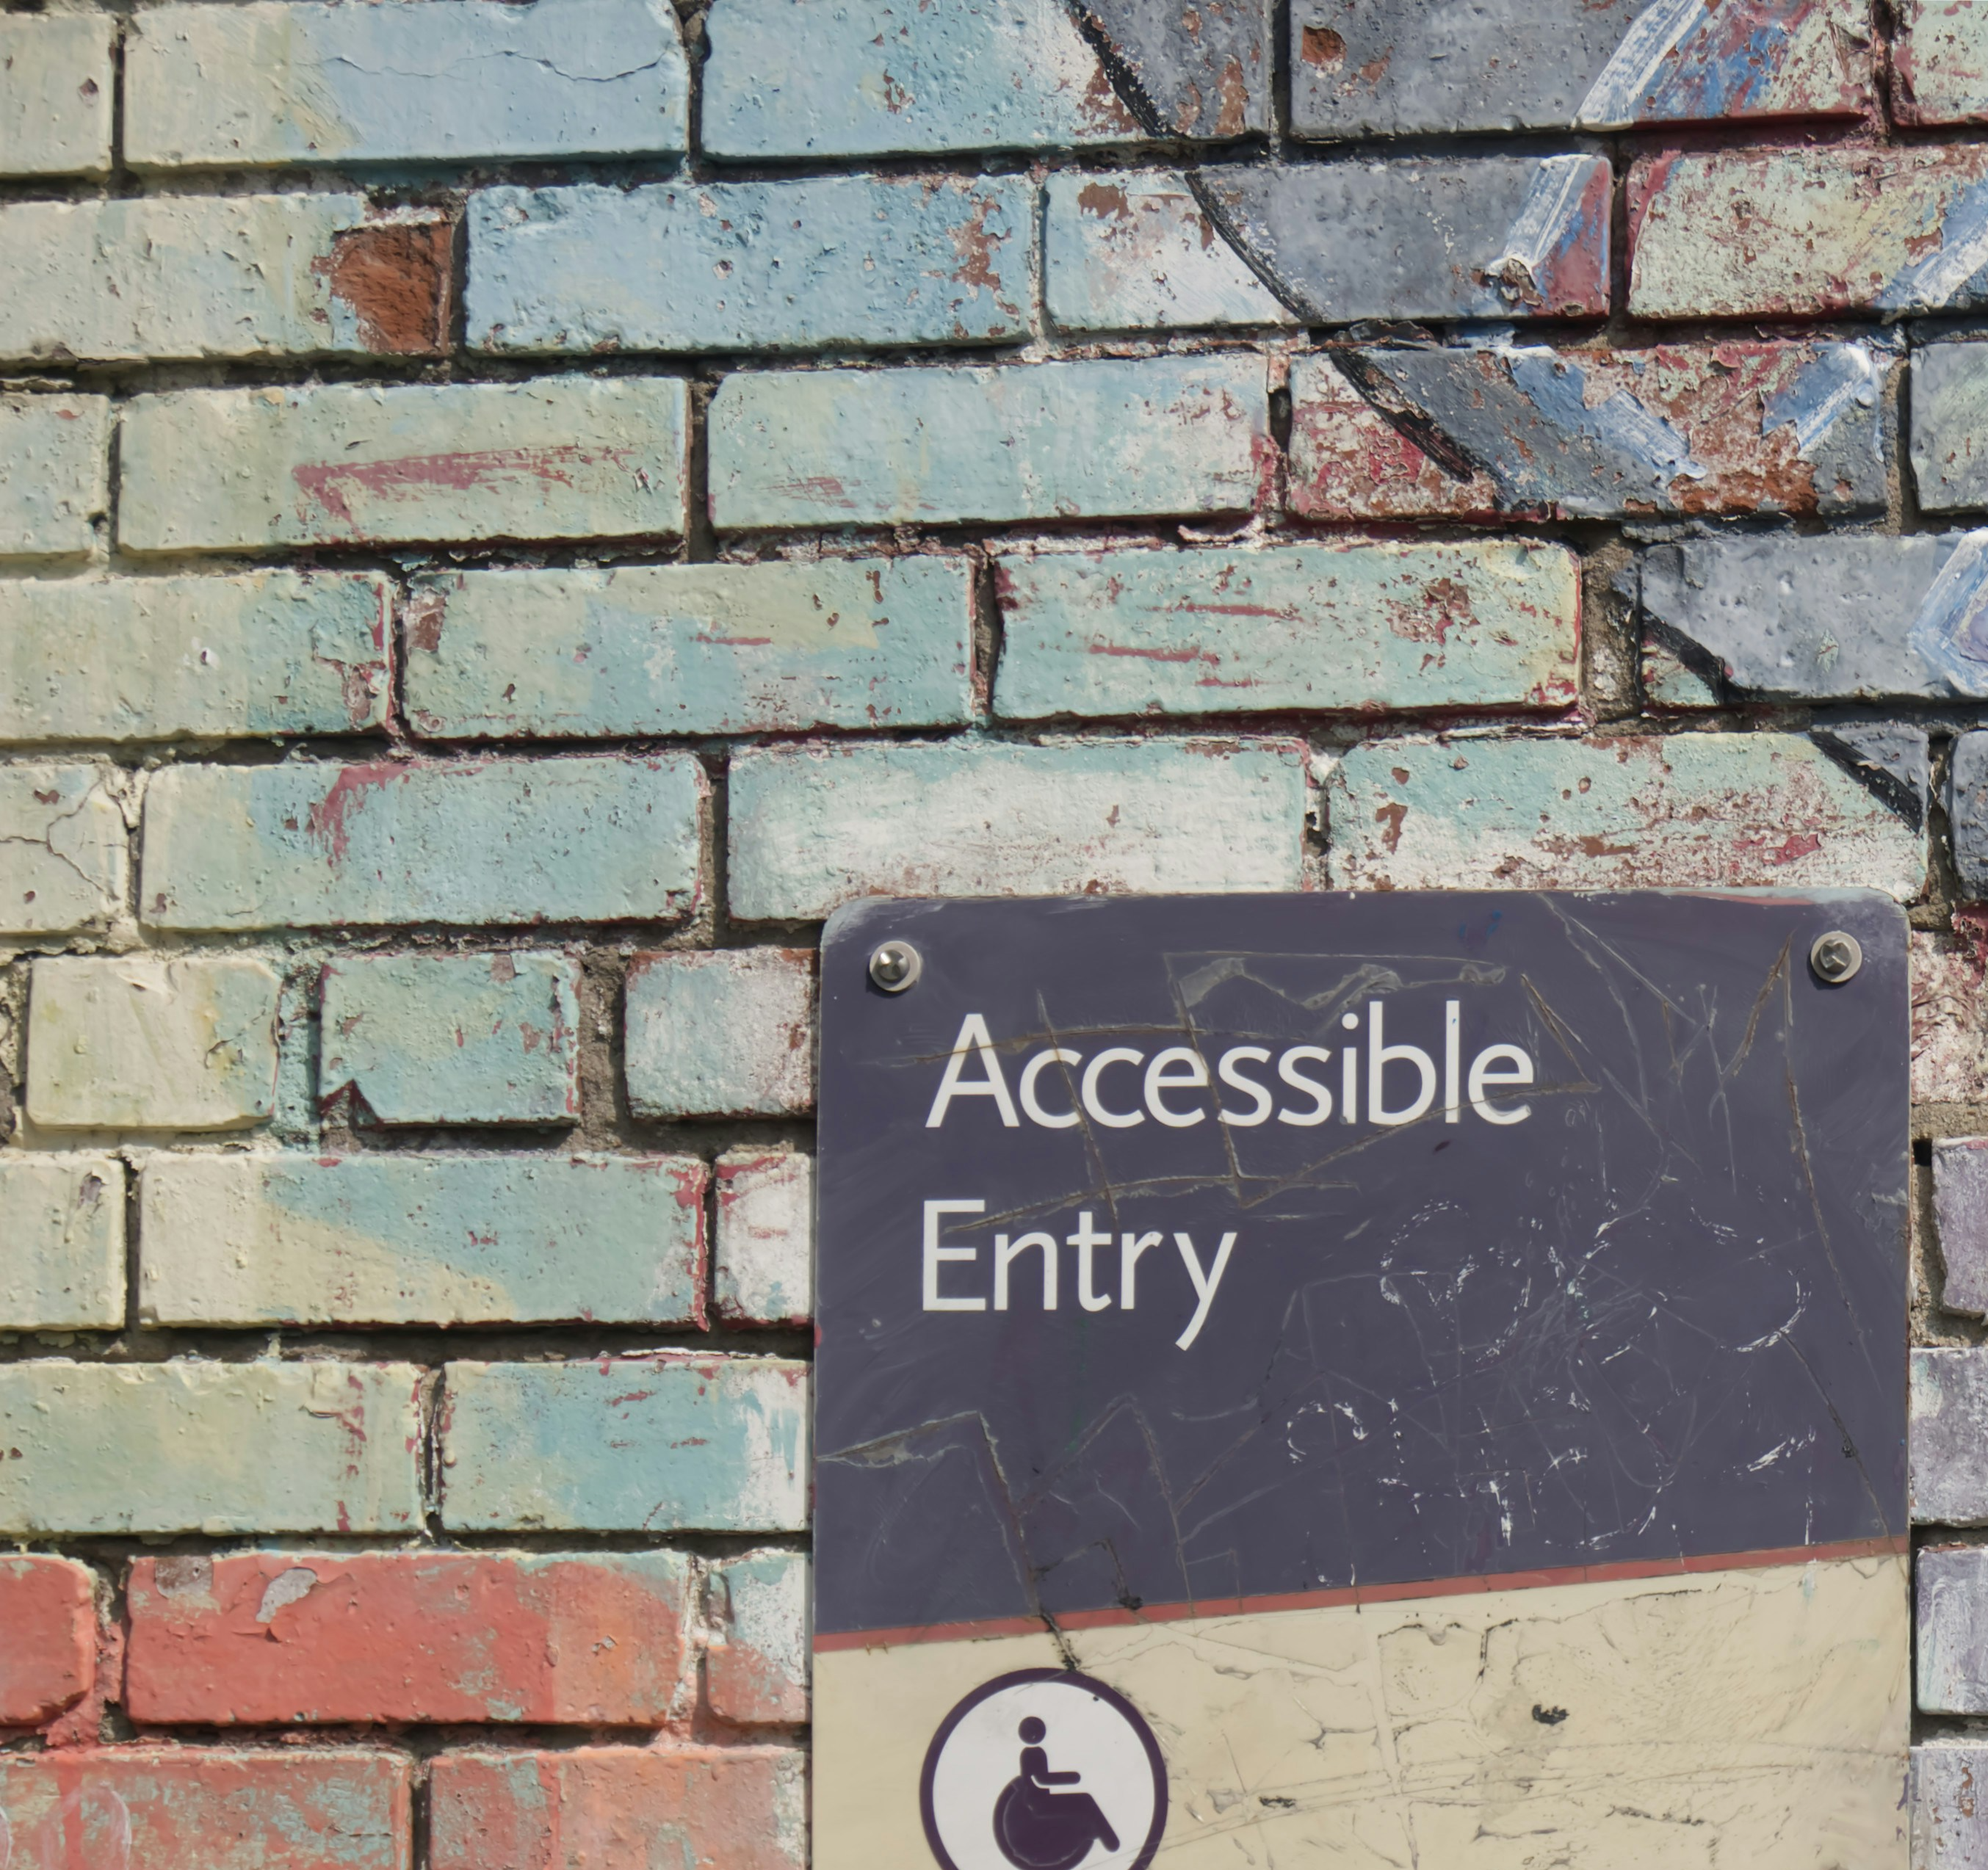 Multi-colored brick wall with a grey sign with white text "Accessible entrance"